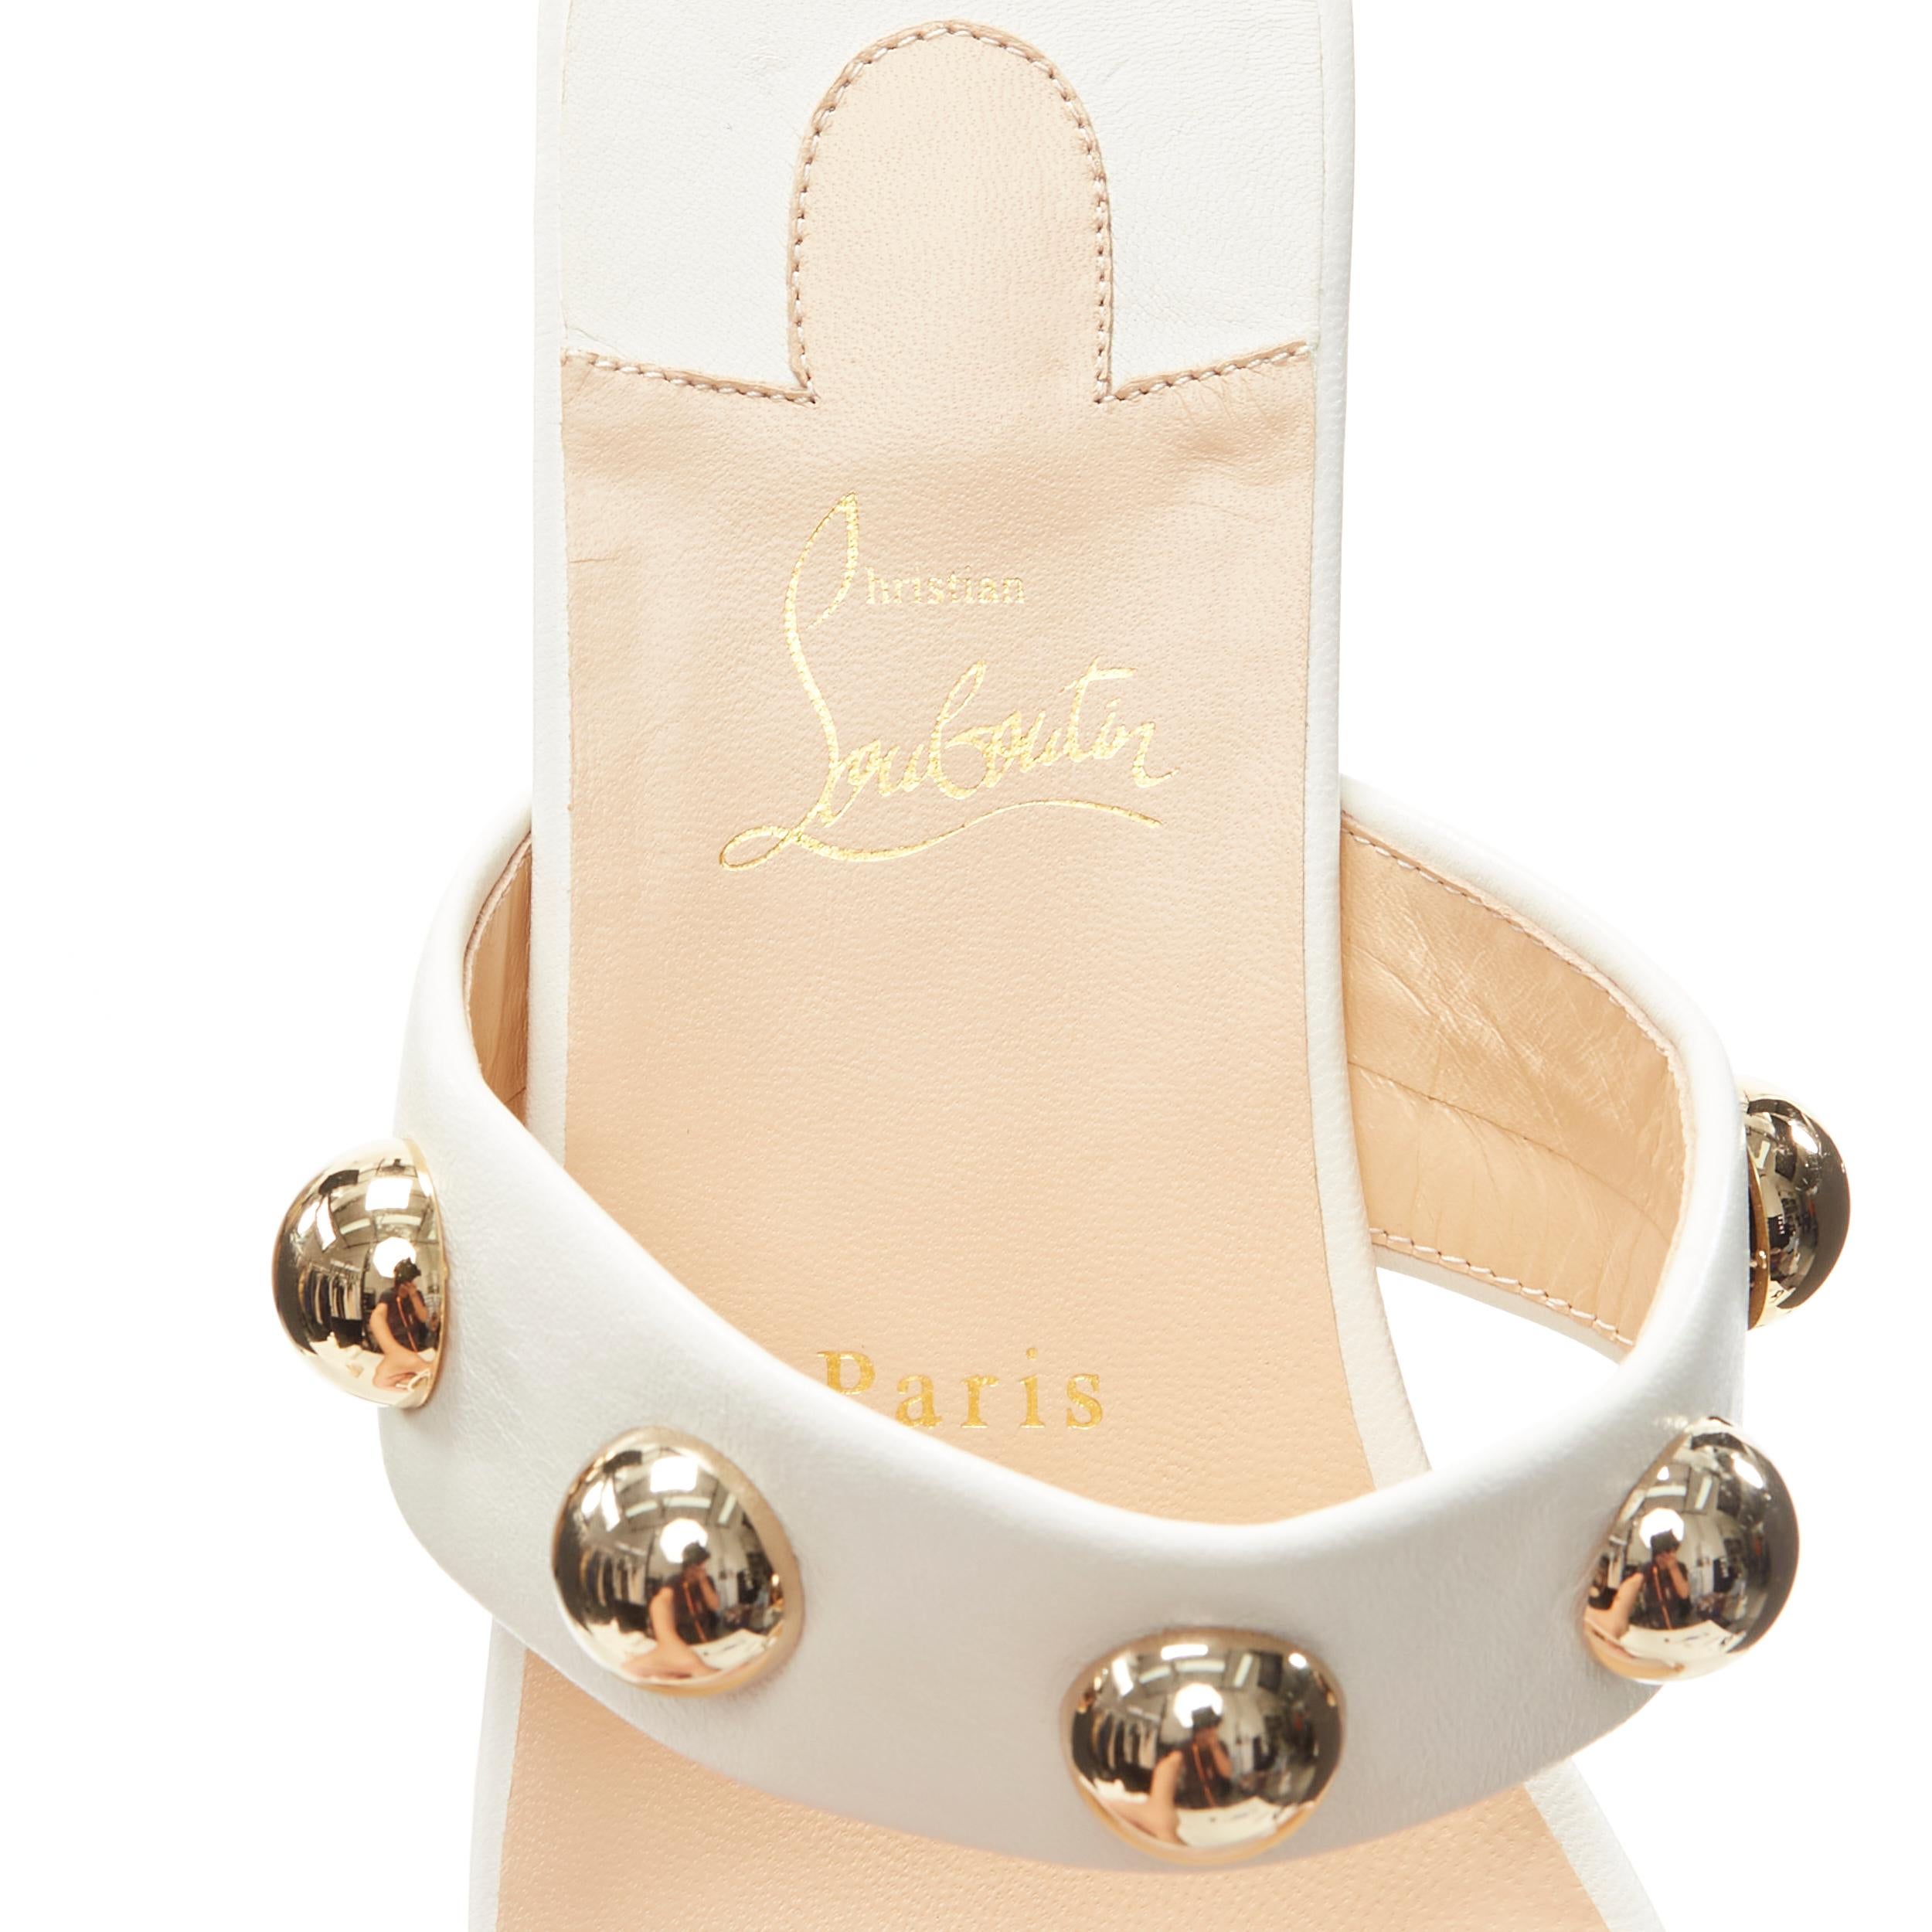 new CHRISTIAN LOUBOUTIN gold dome sphere stud white leather flat sandals EU37.5 4